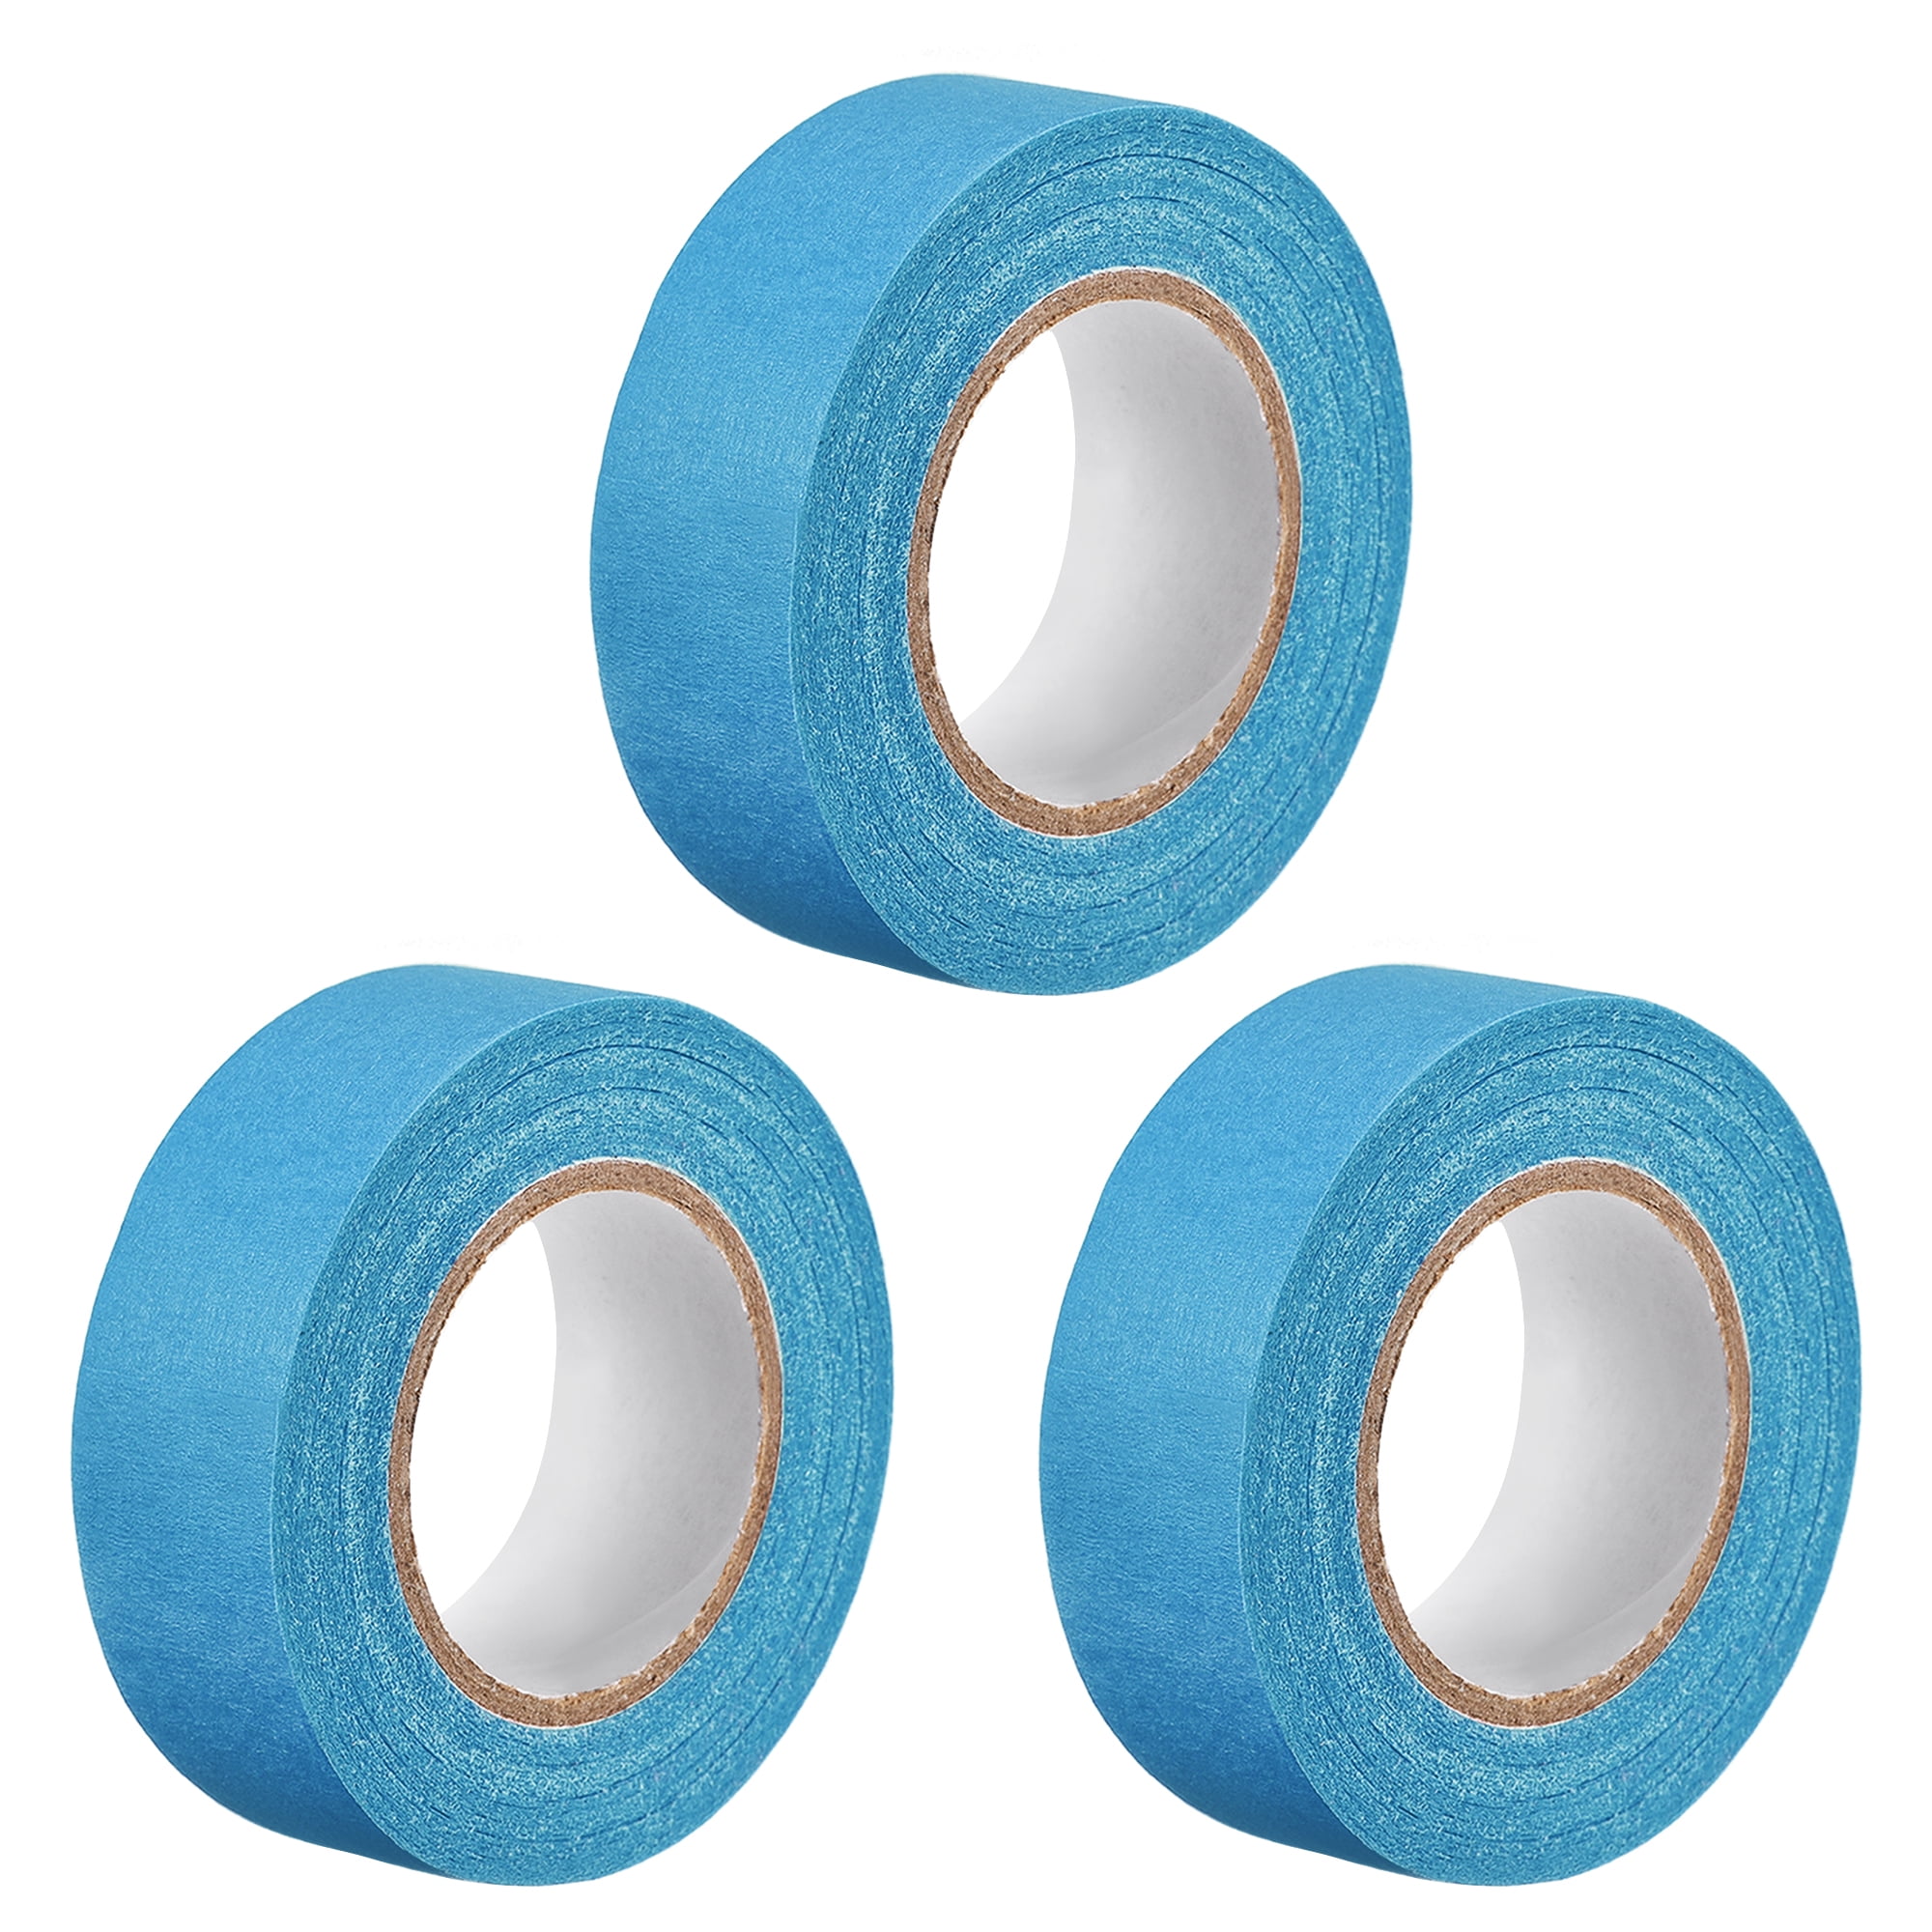 50mm 2 inch Wide 20m 21 Yards Masking Tape Painters Tape Rolls